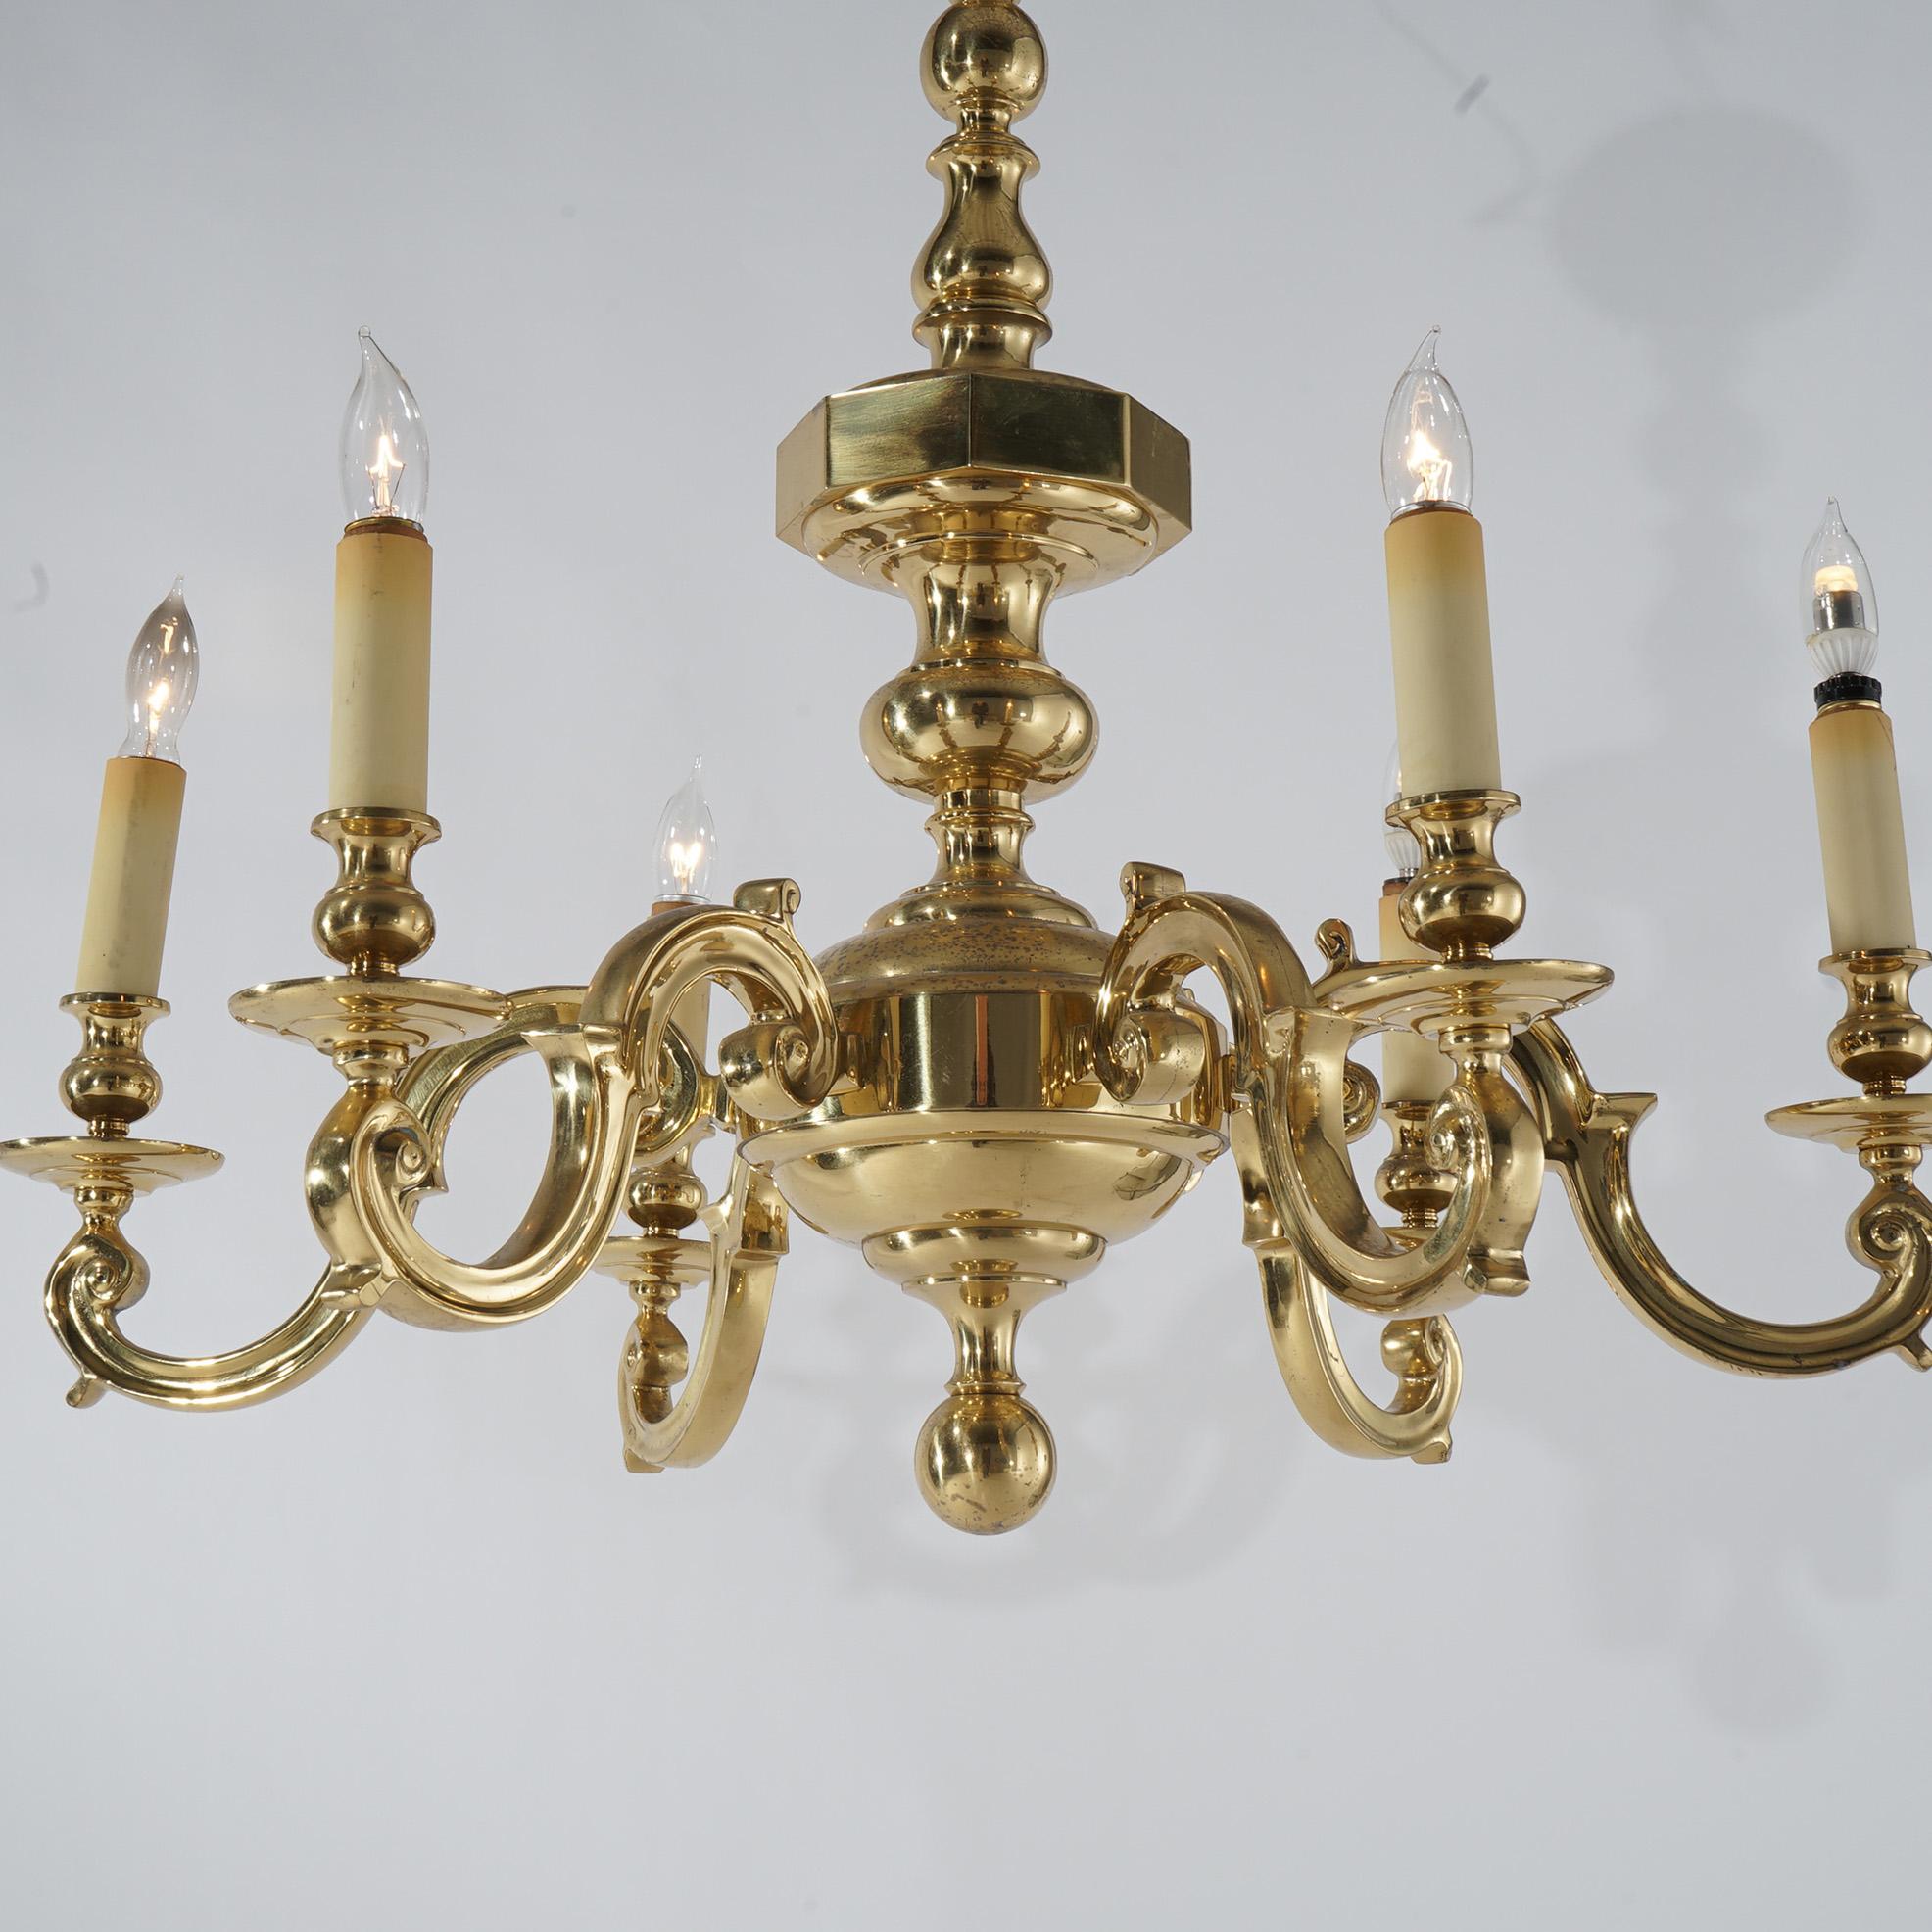 ***Ask About Reduced In-House Delivery Rates - Reliable Professional Service & Fully Insured***
Large Antique Neoclassical Brass Chandelier with Six Scroll Form Arms and Faceted Font, c1930

Measures- 32''H x 32.5''W x 32.5''D